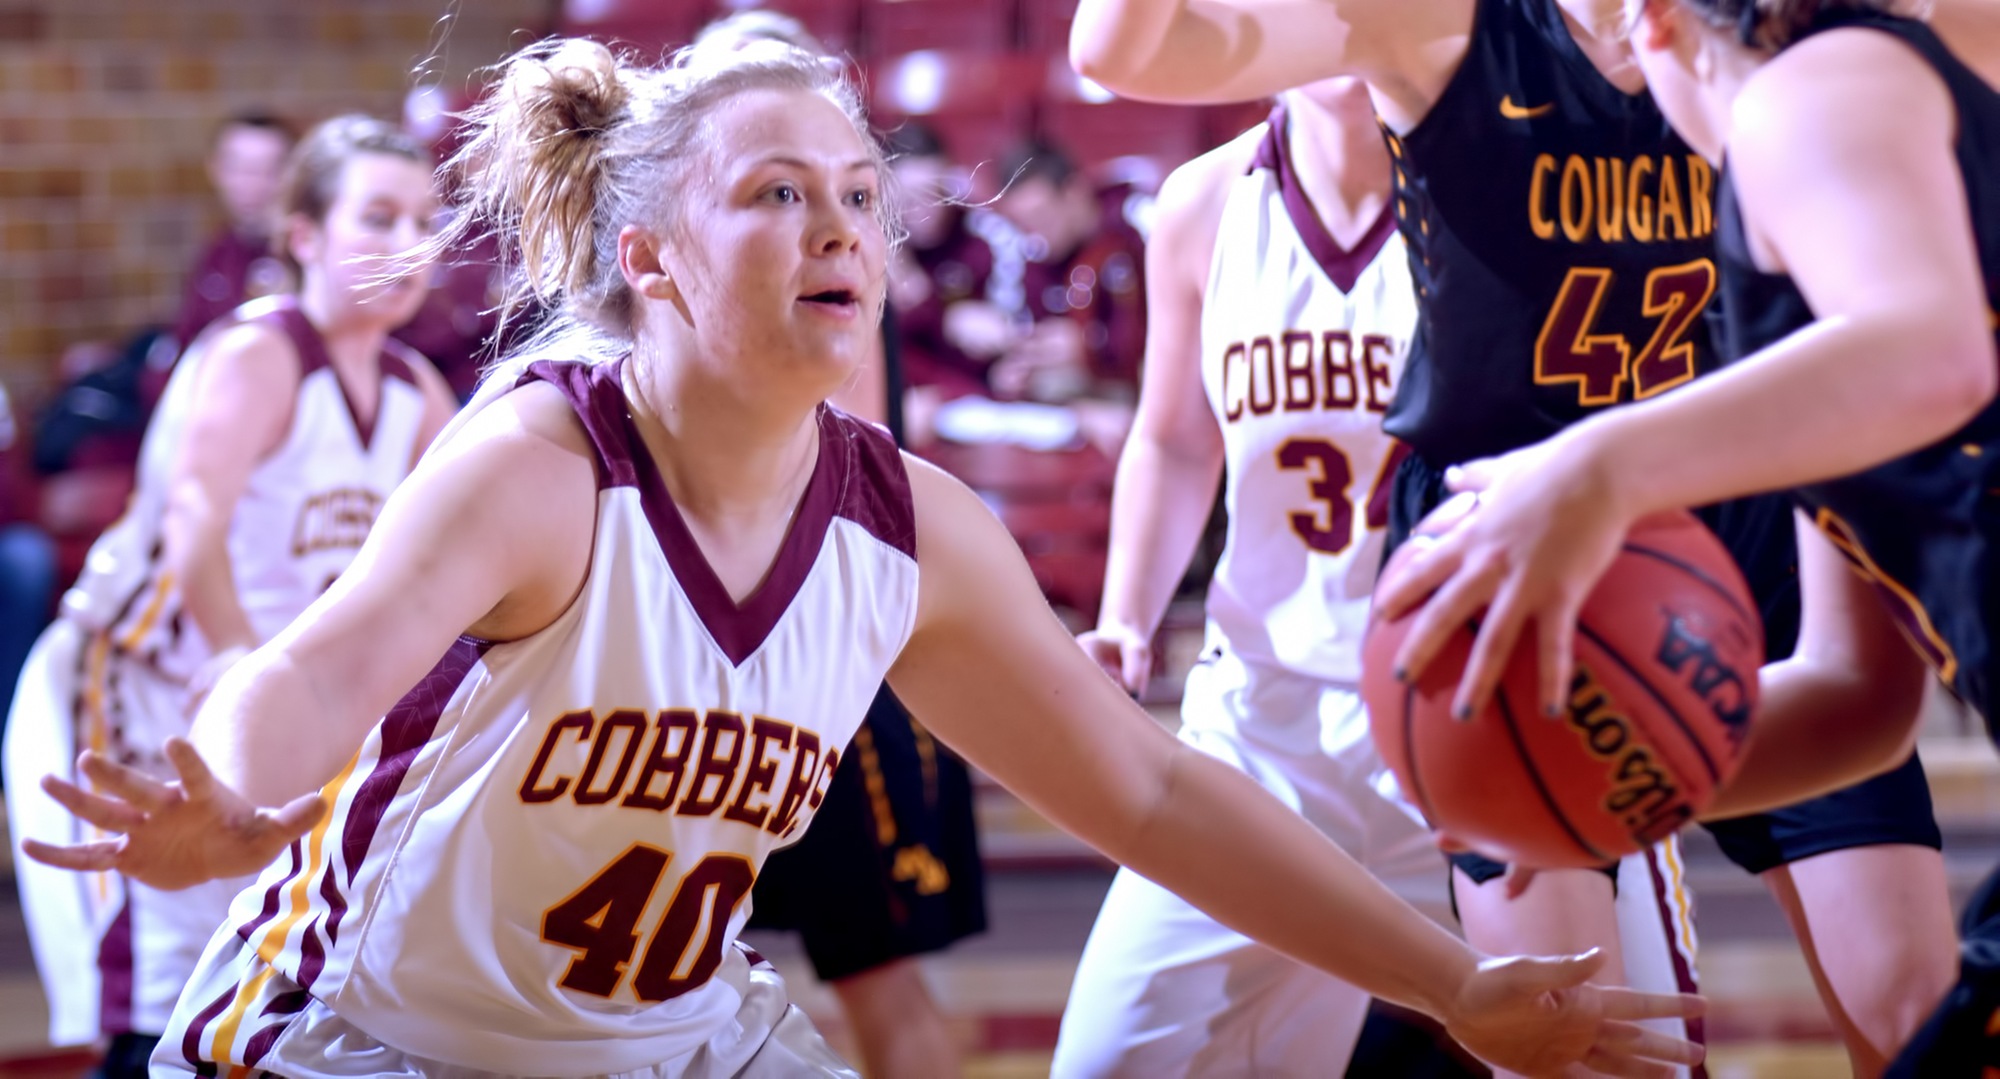 Mira Ellefson scored a career-high 16 points in the Cobbers' game against Chapman.